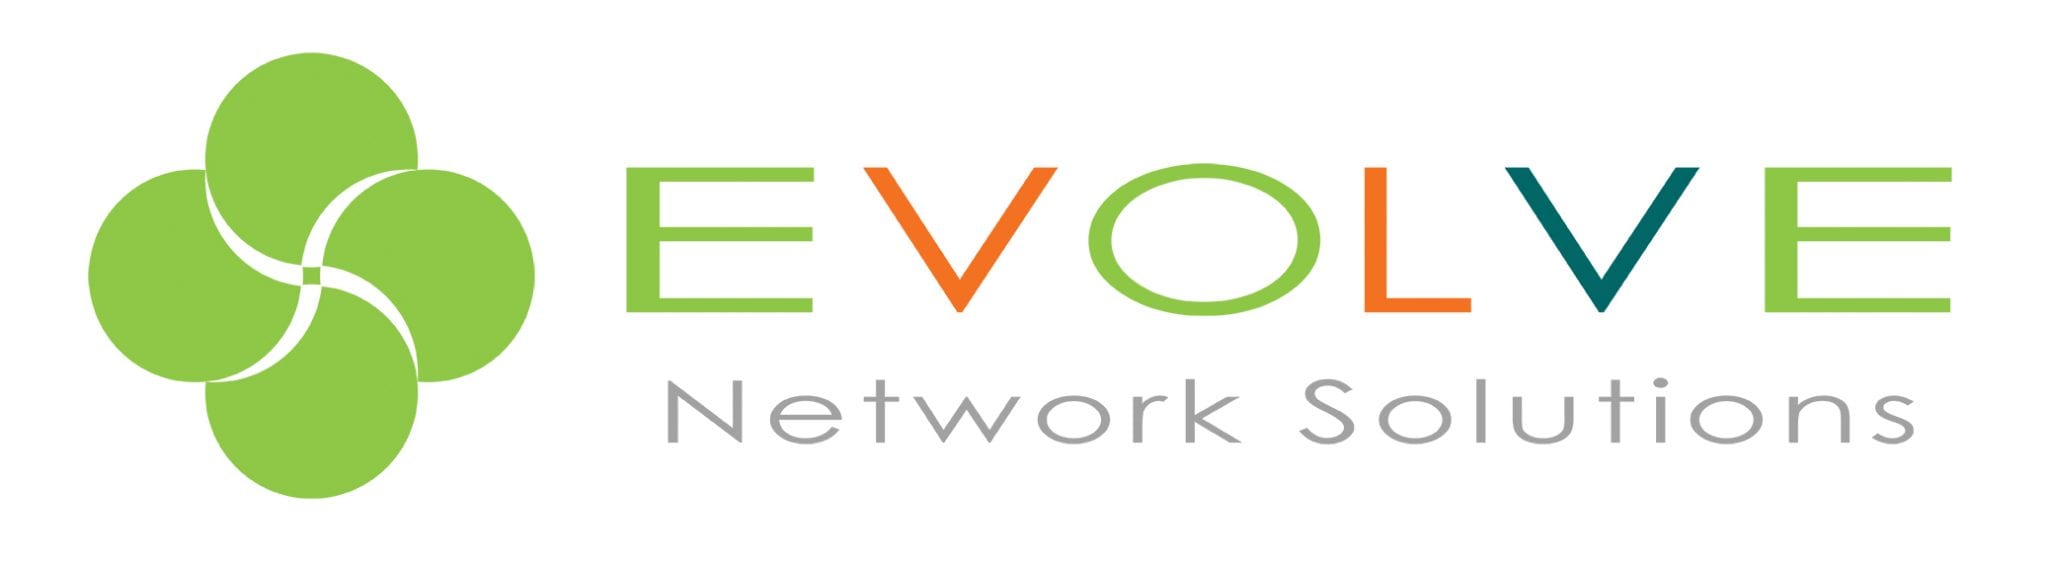 Evolve Solutions